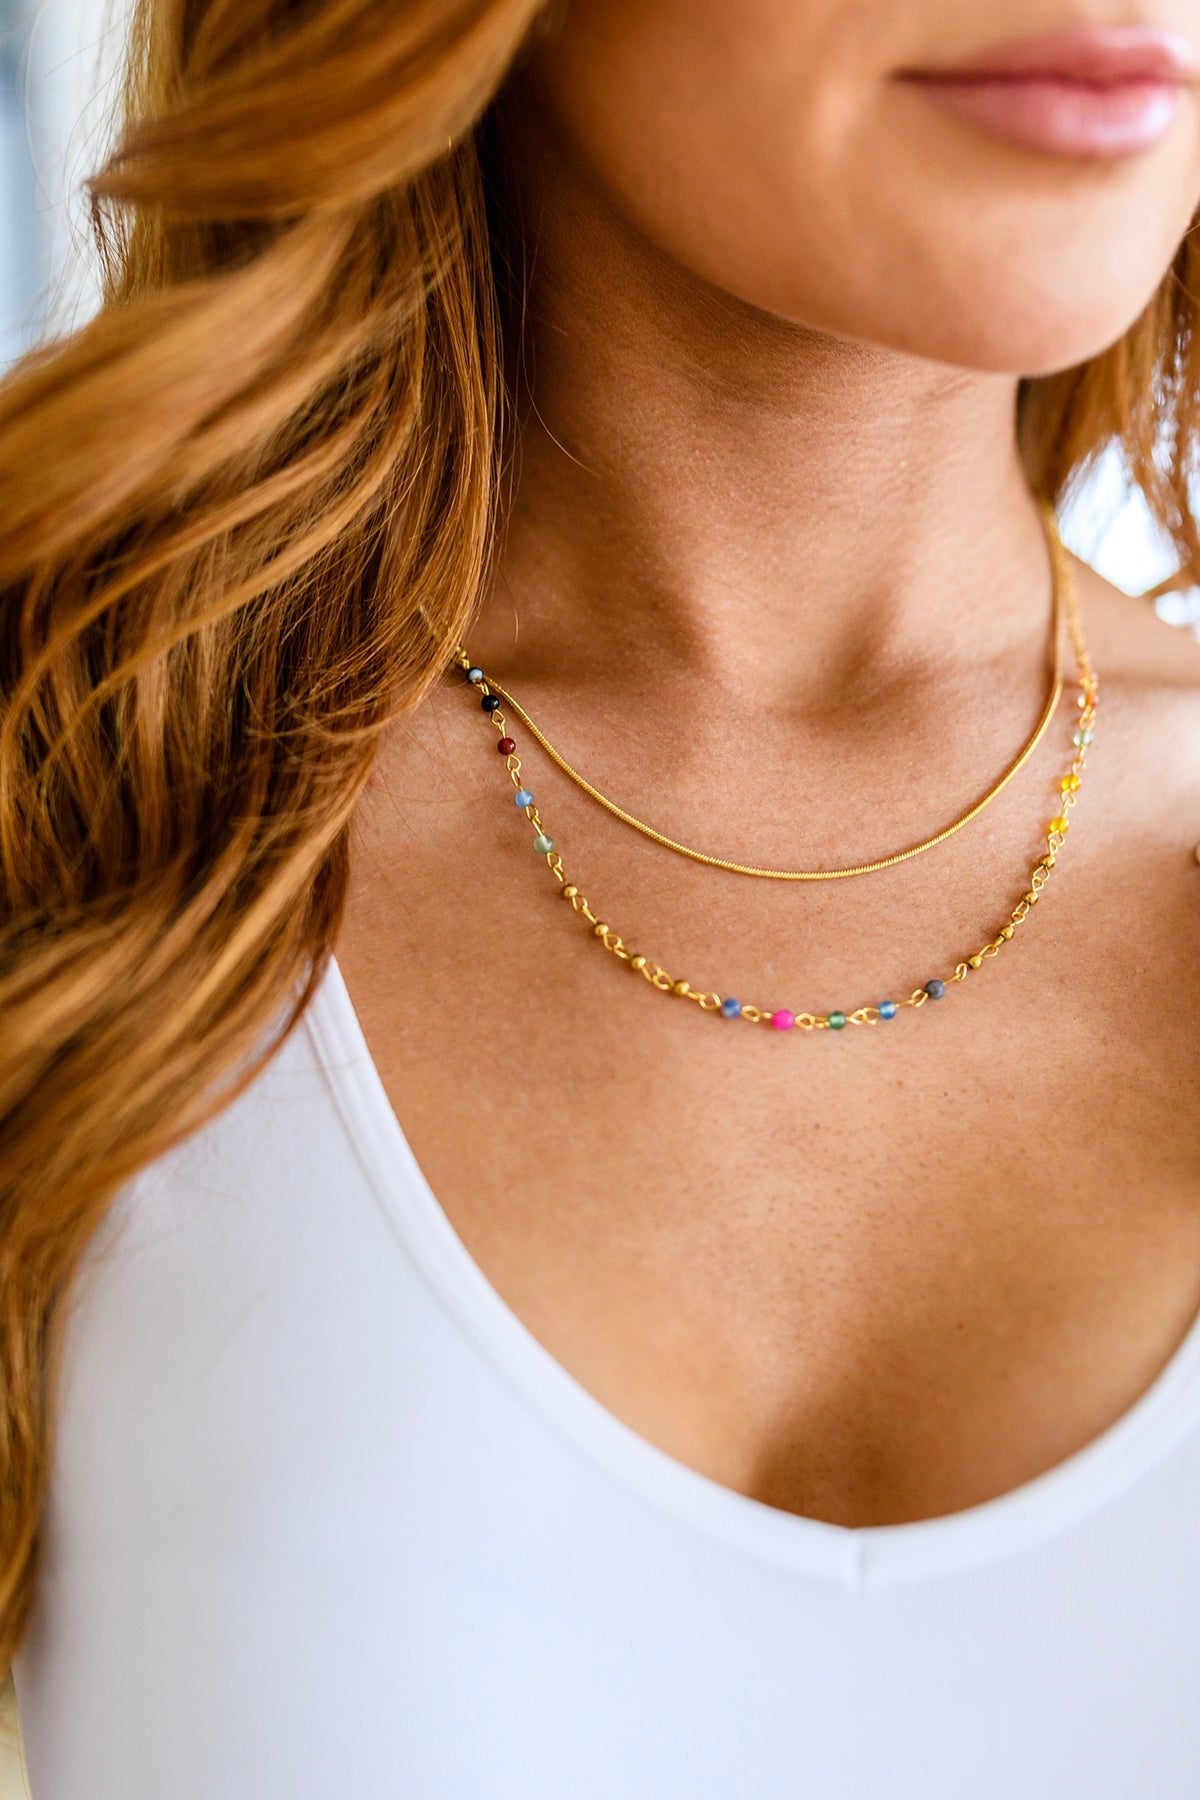 Golden Kaleidoscope Layered Necklace (Ships in 1-2 Weeks)